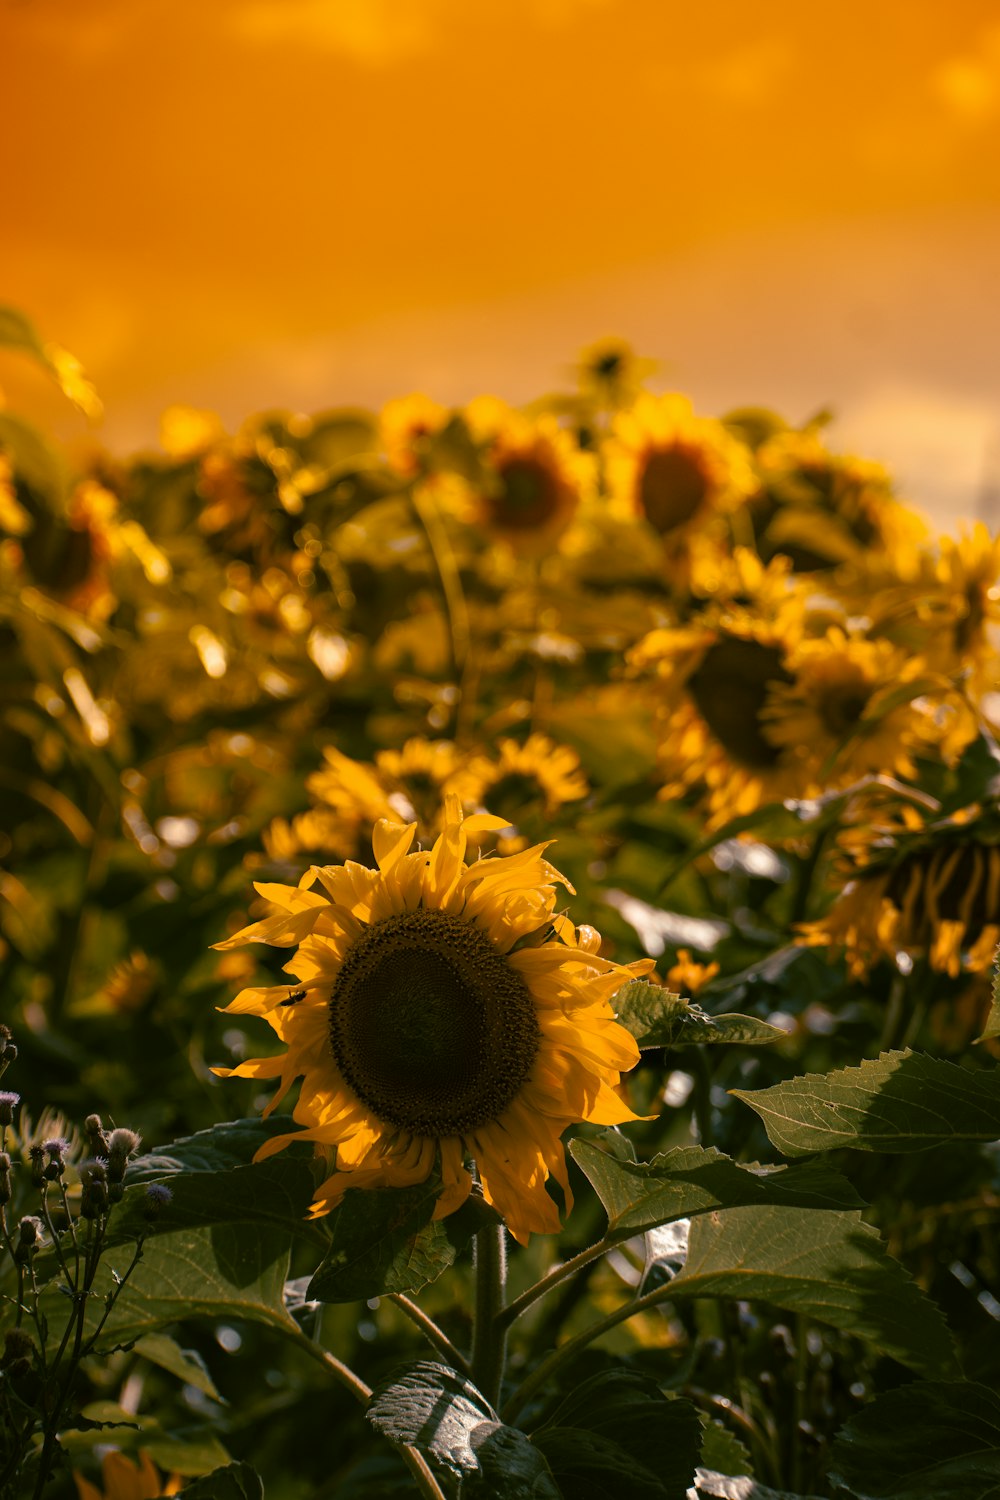 a large field of sunflowers with a yellow sky in the background